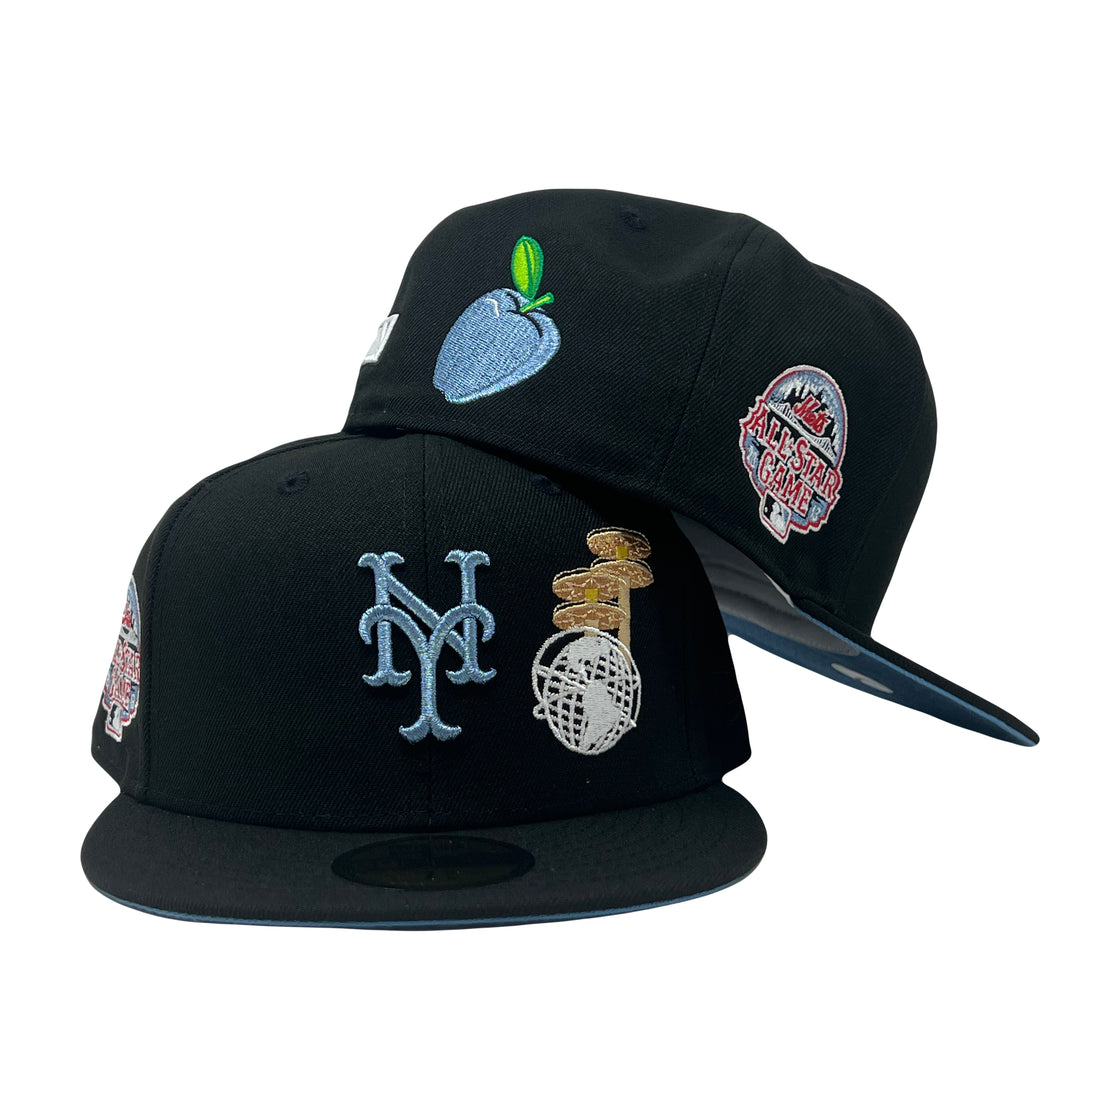 New York Mets Shea 2013 All Star Game Fresh Meadows Corona Park 5950 New Era Fitted Hat